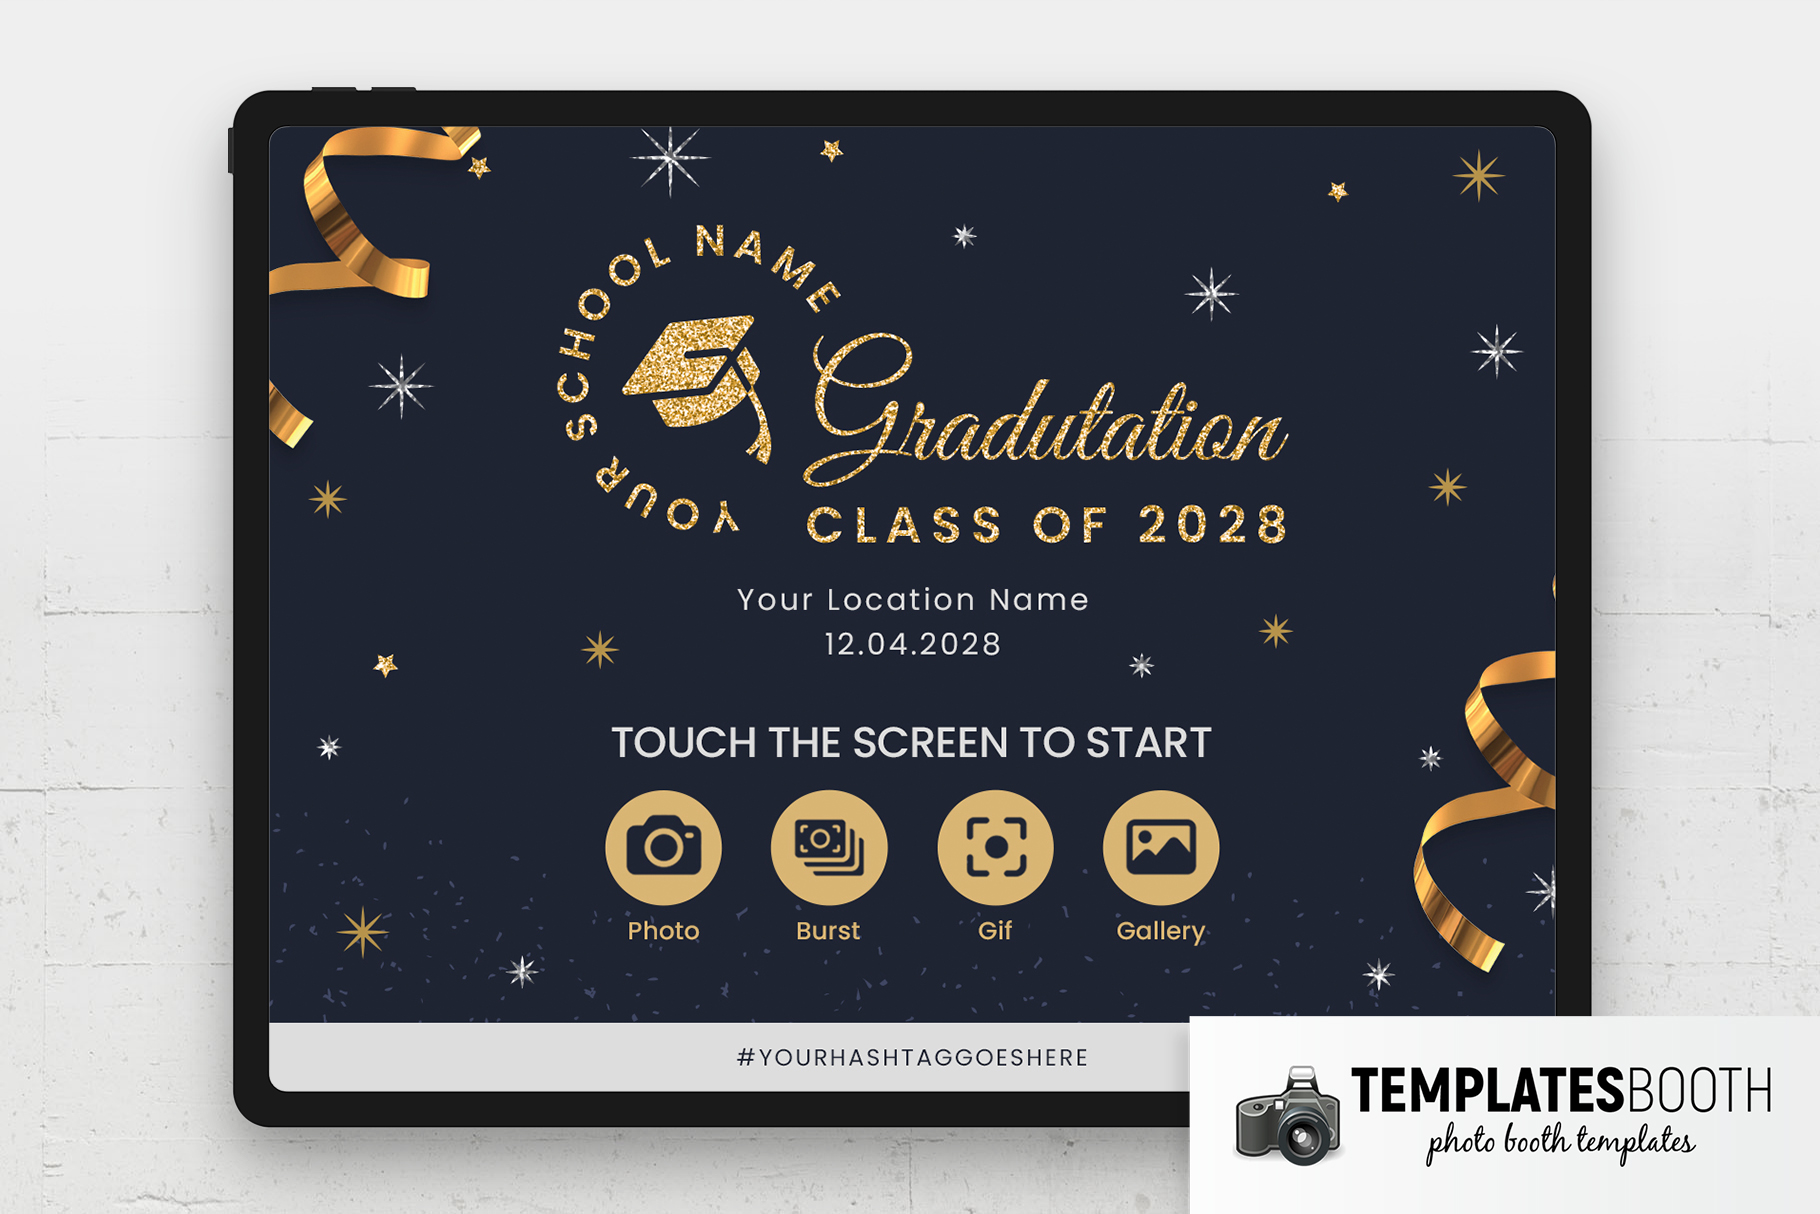 Graduation Celebration Photo Booth Welcome Screen